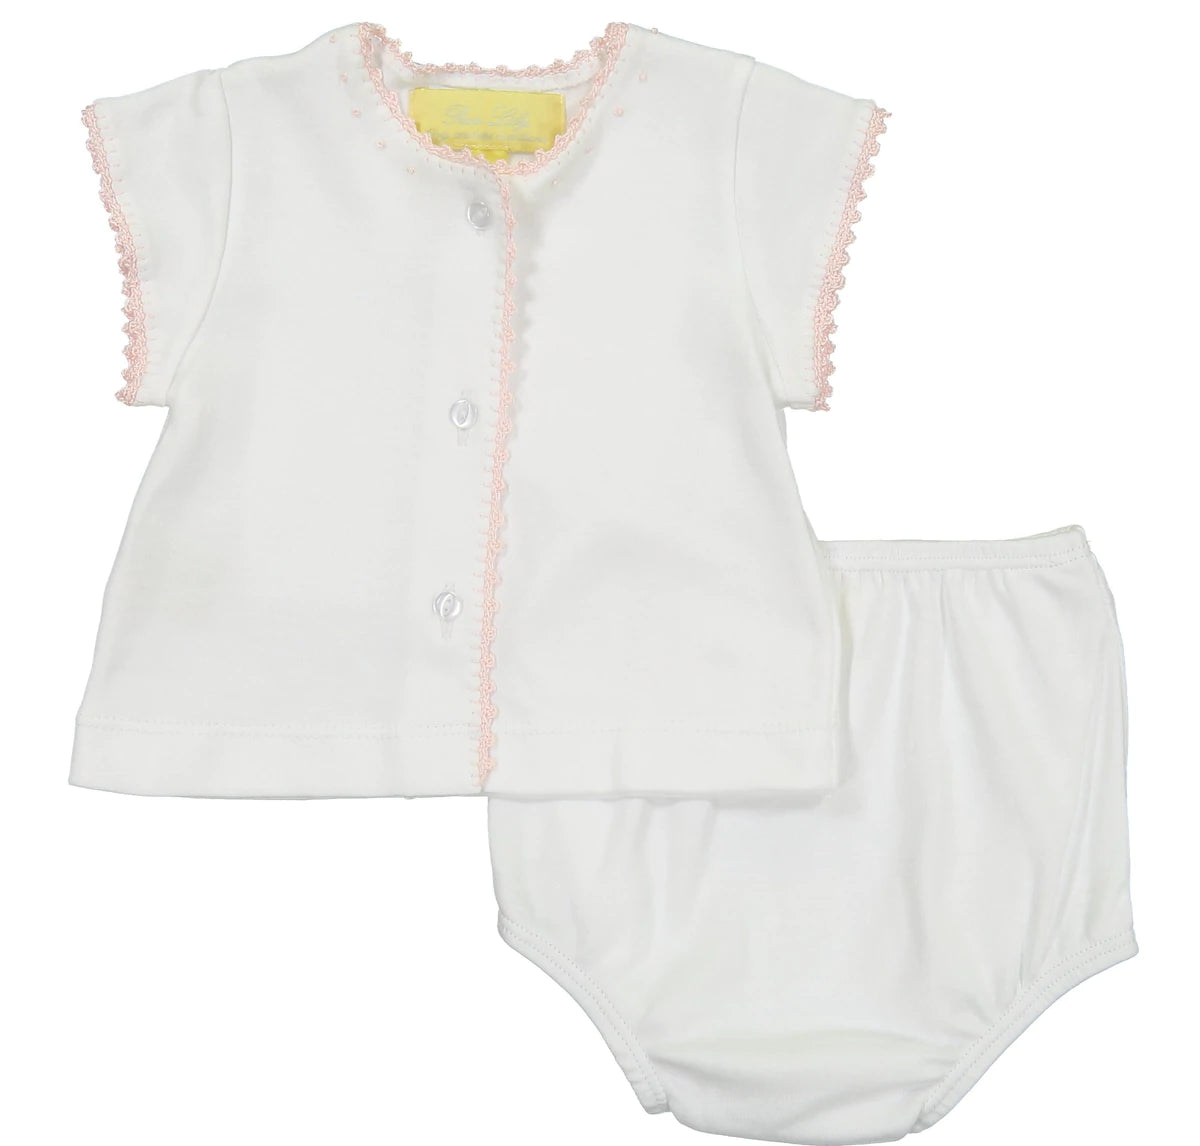 Pixie Lily Jersey Crib Set with Pink Trim